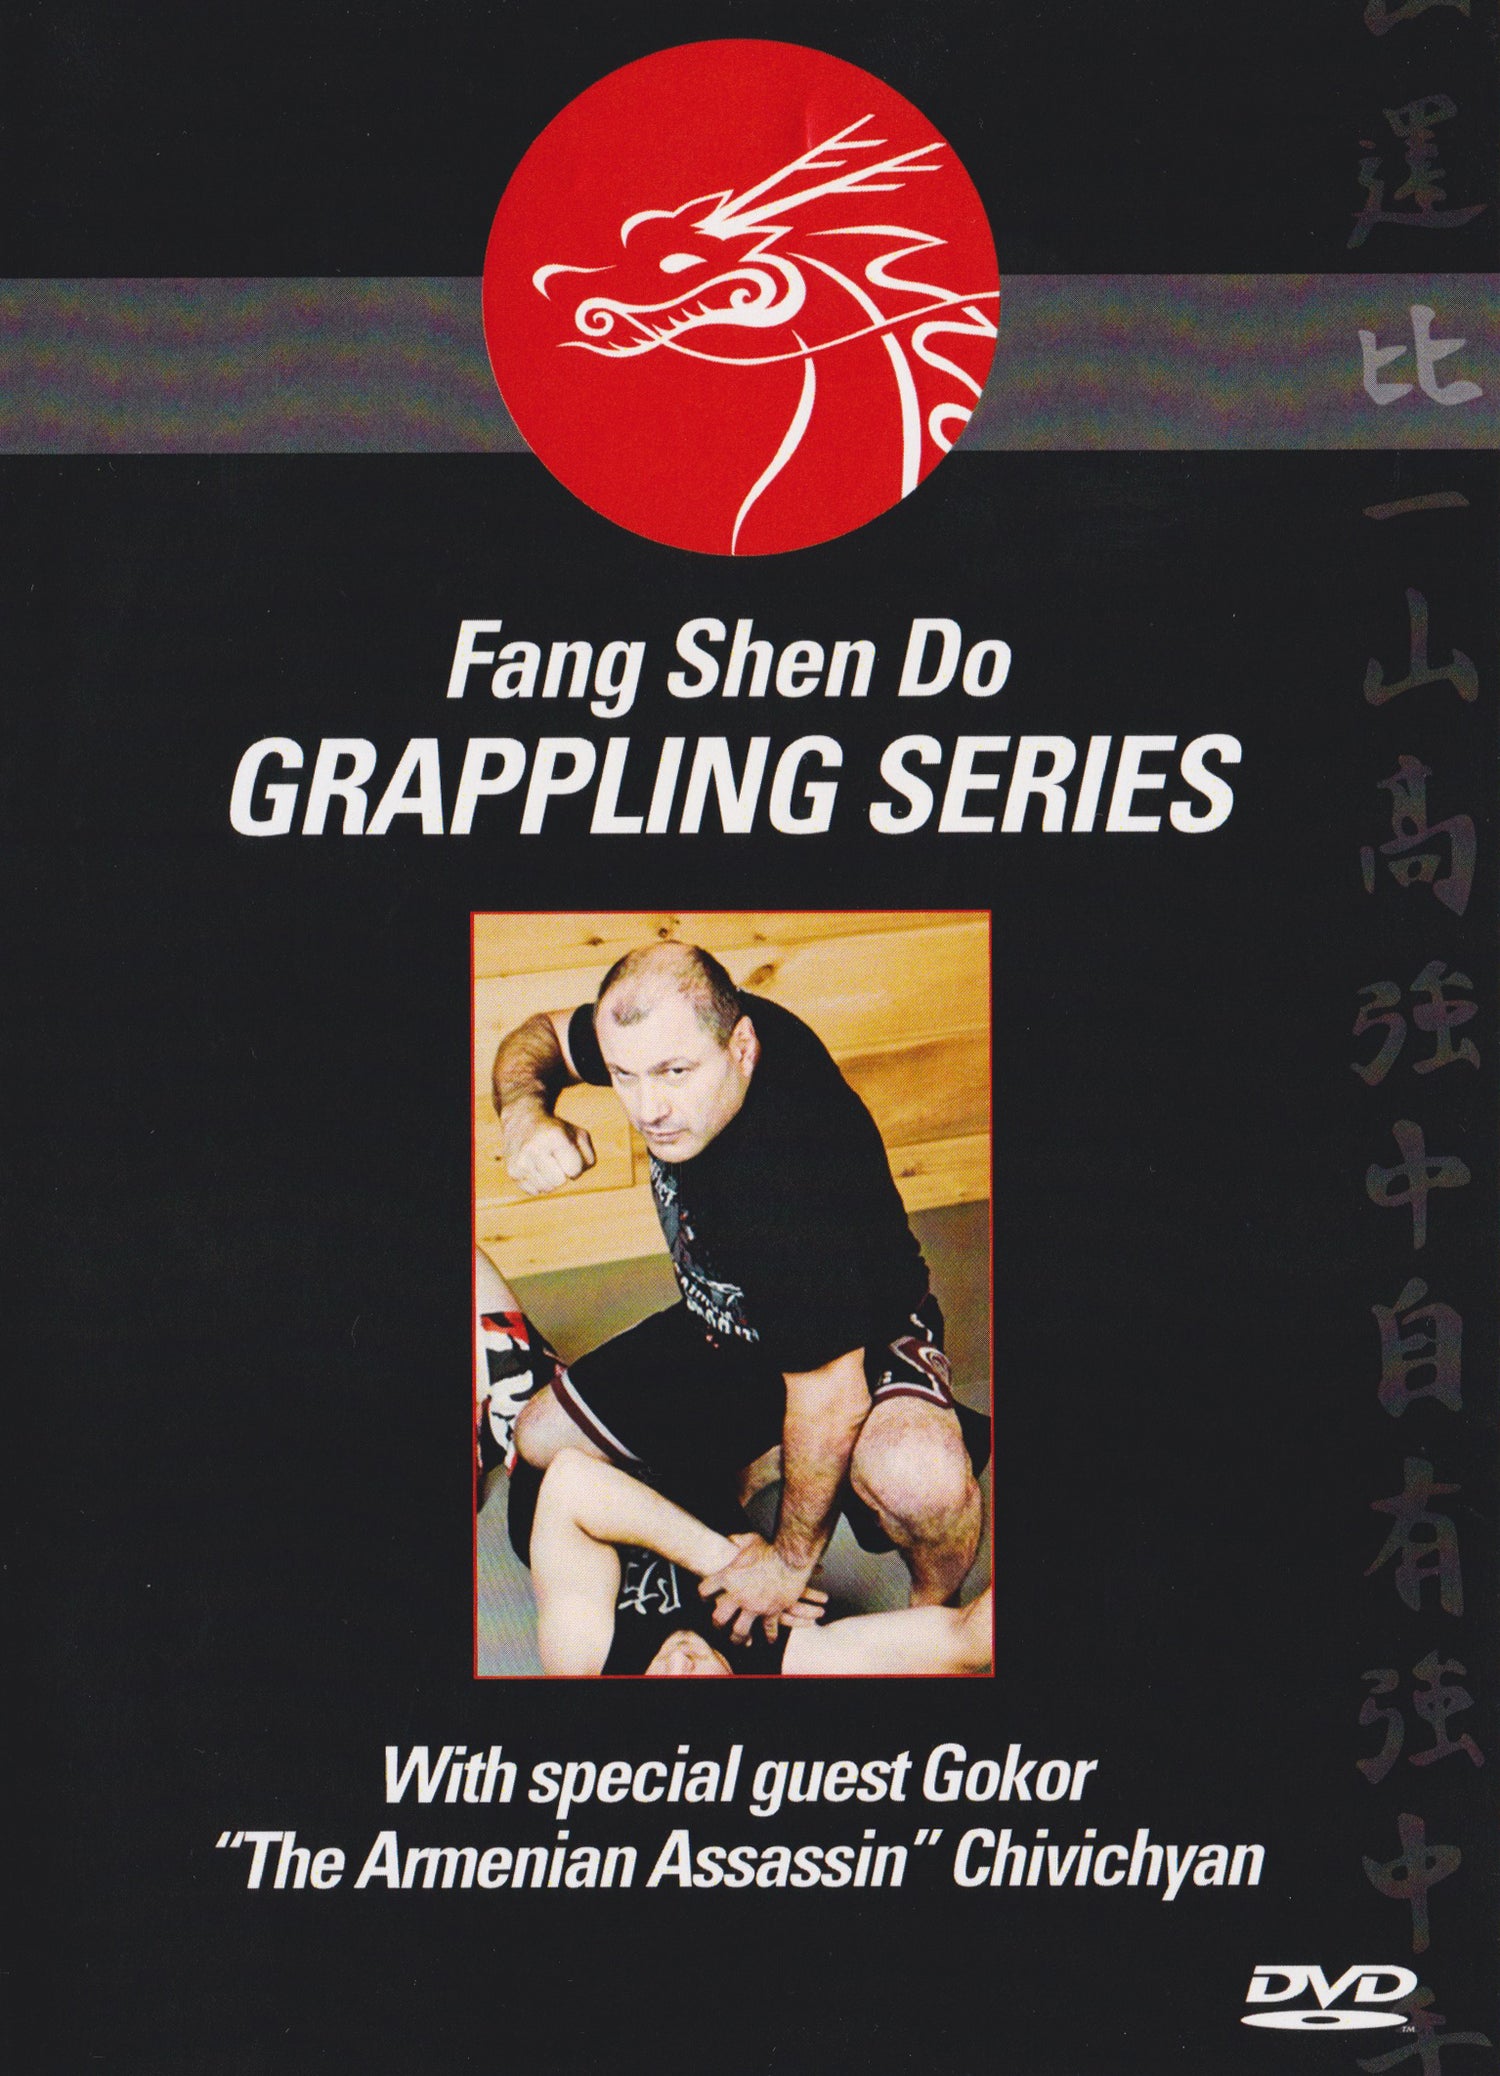 Fang Shen Do Grappling 2 DVD Set with Gokor Chivichyan (Preowned) - Budovideos Inc